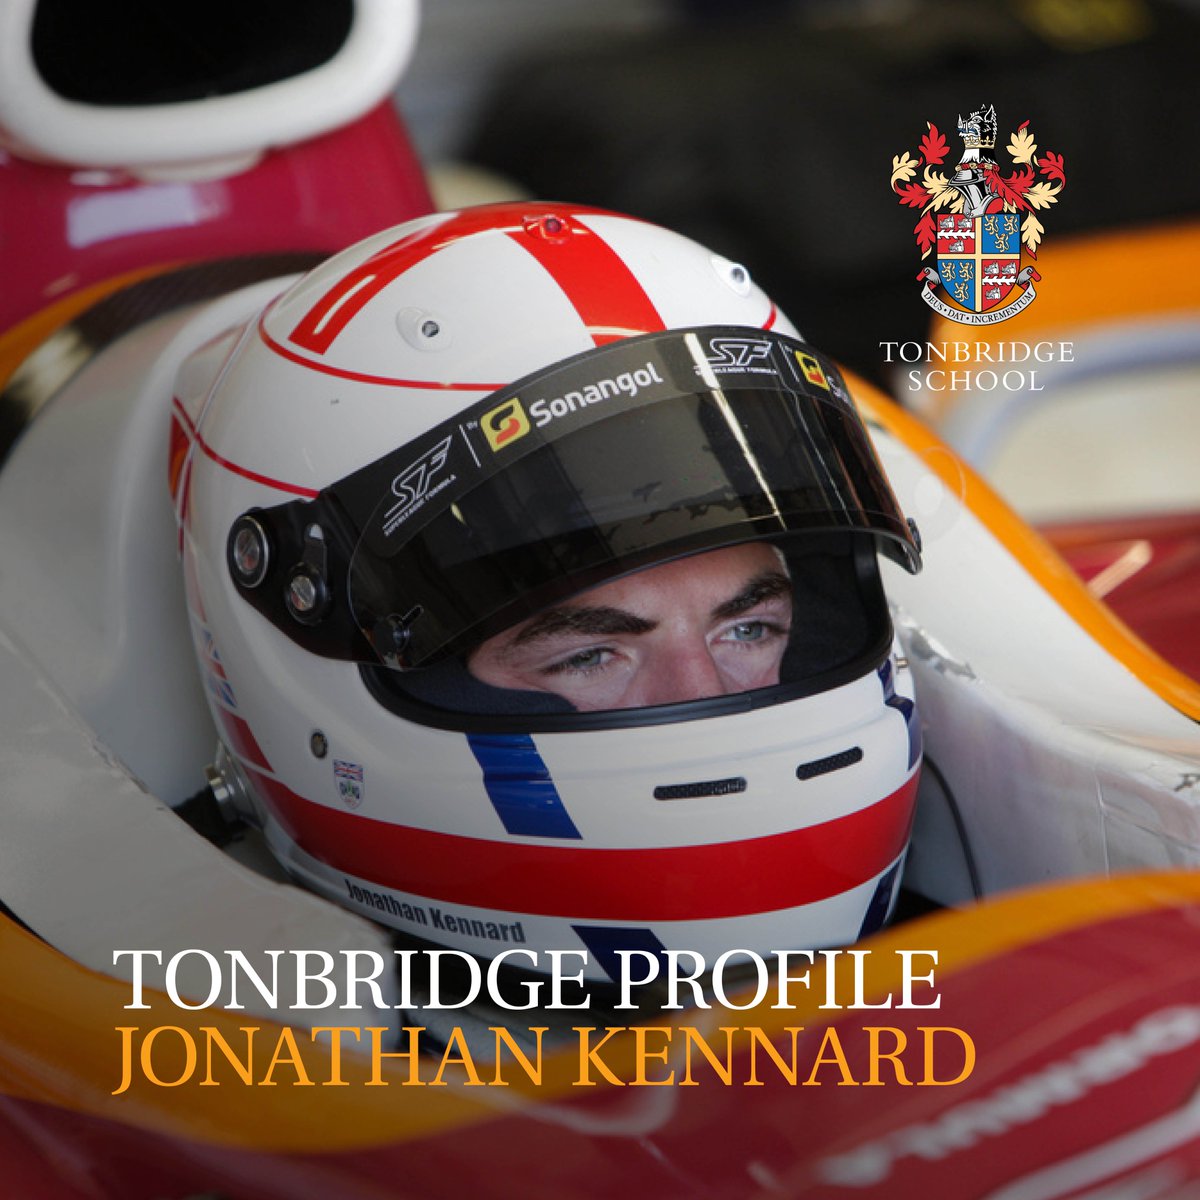 The latest Tonbridge Profile features Jonathan Kennard (WW 98-03). Jonathan has enjoyed a fast-paced career in motorsports, competing in Le Mans and acting as Test Driver for Williams Racing in 2009. Read the full profile here- tonbridgeconnect.org/news/community…